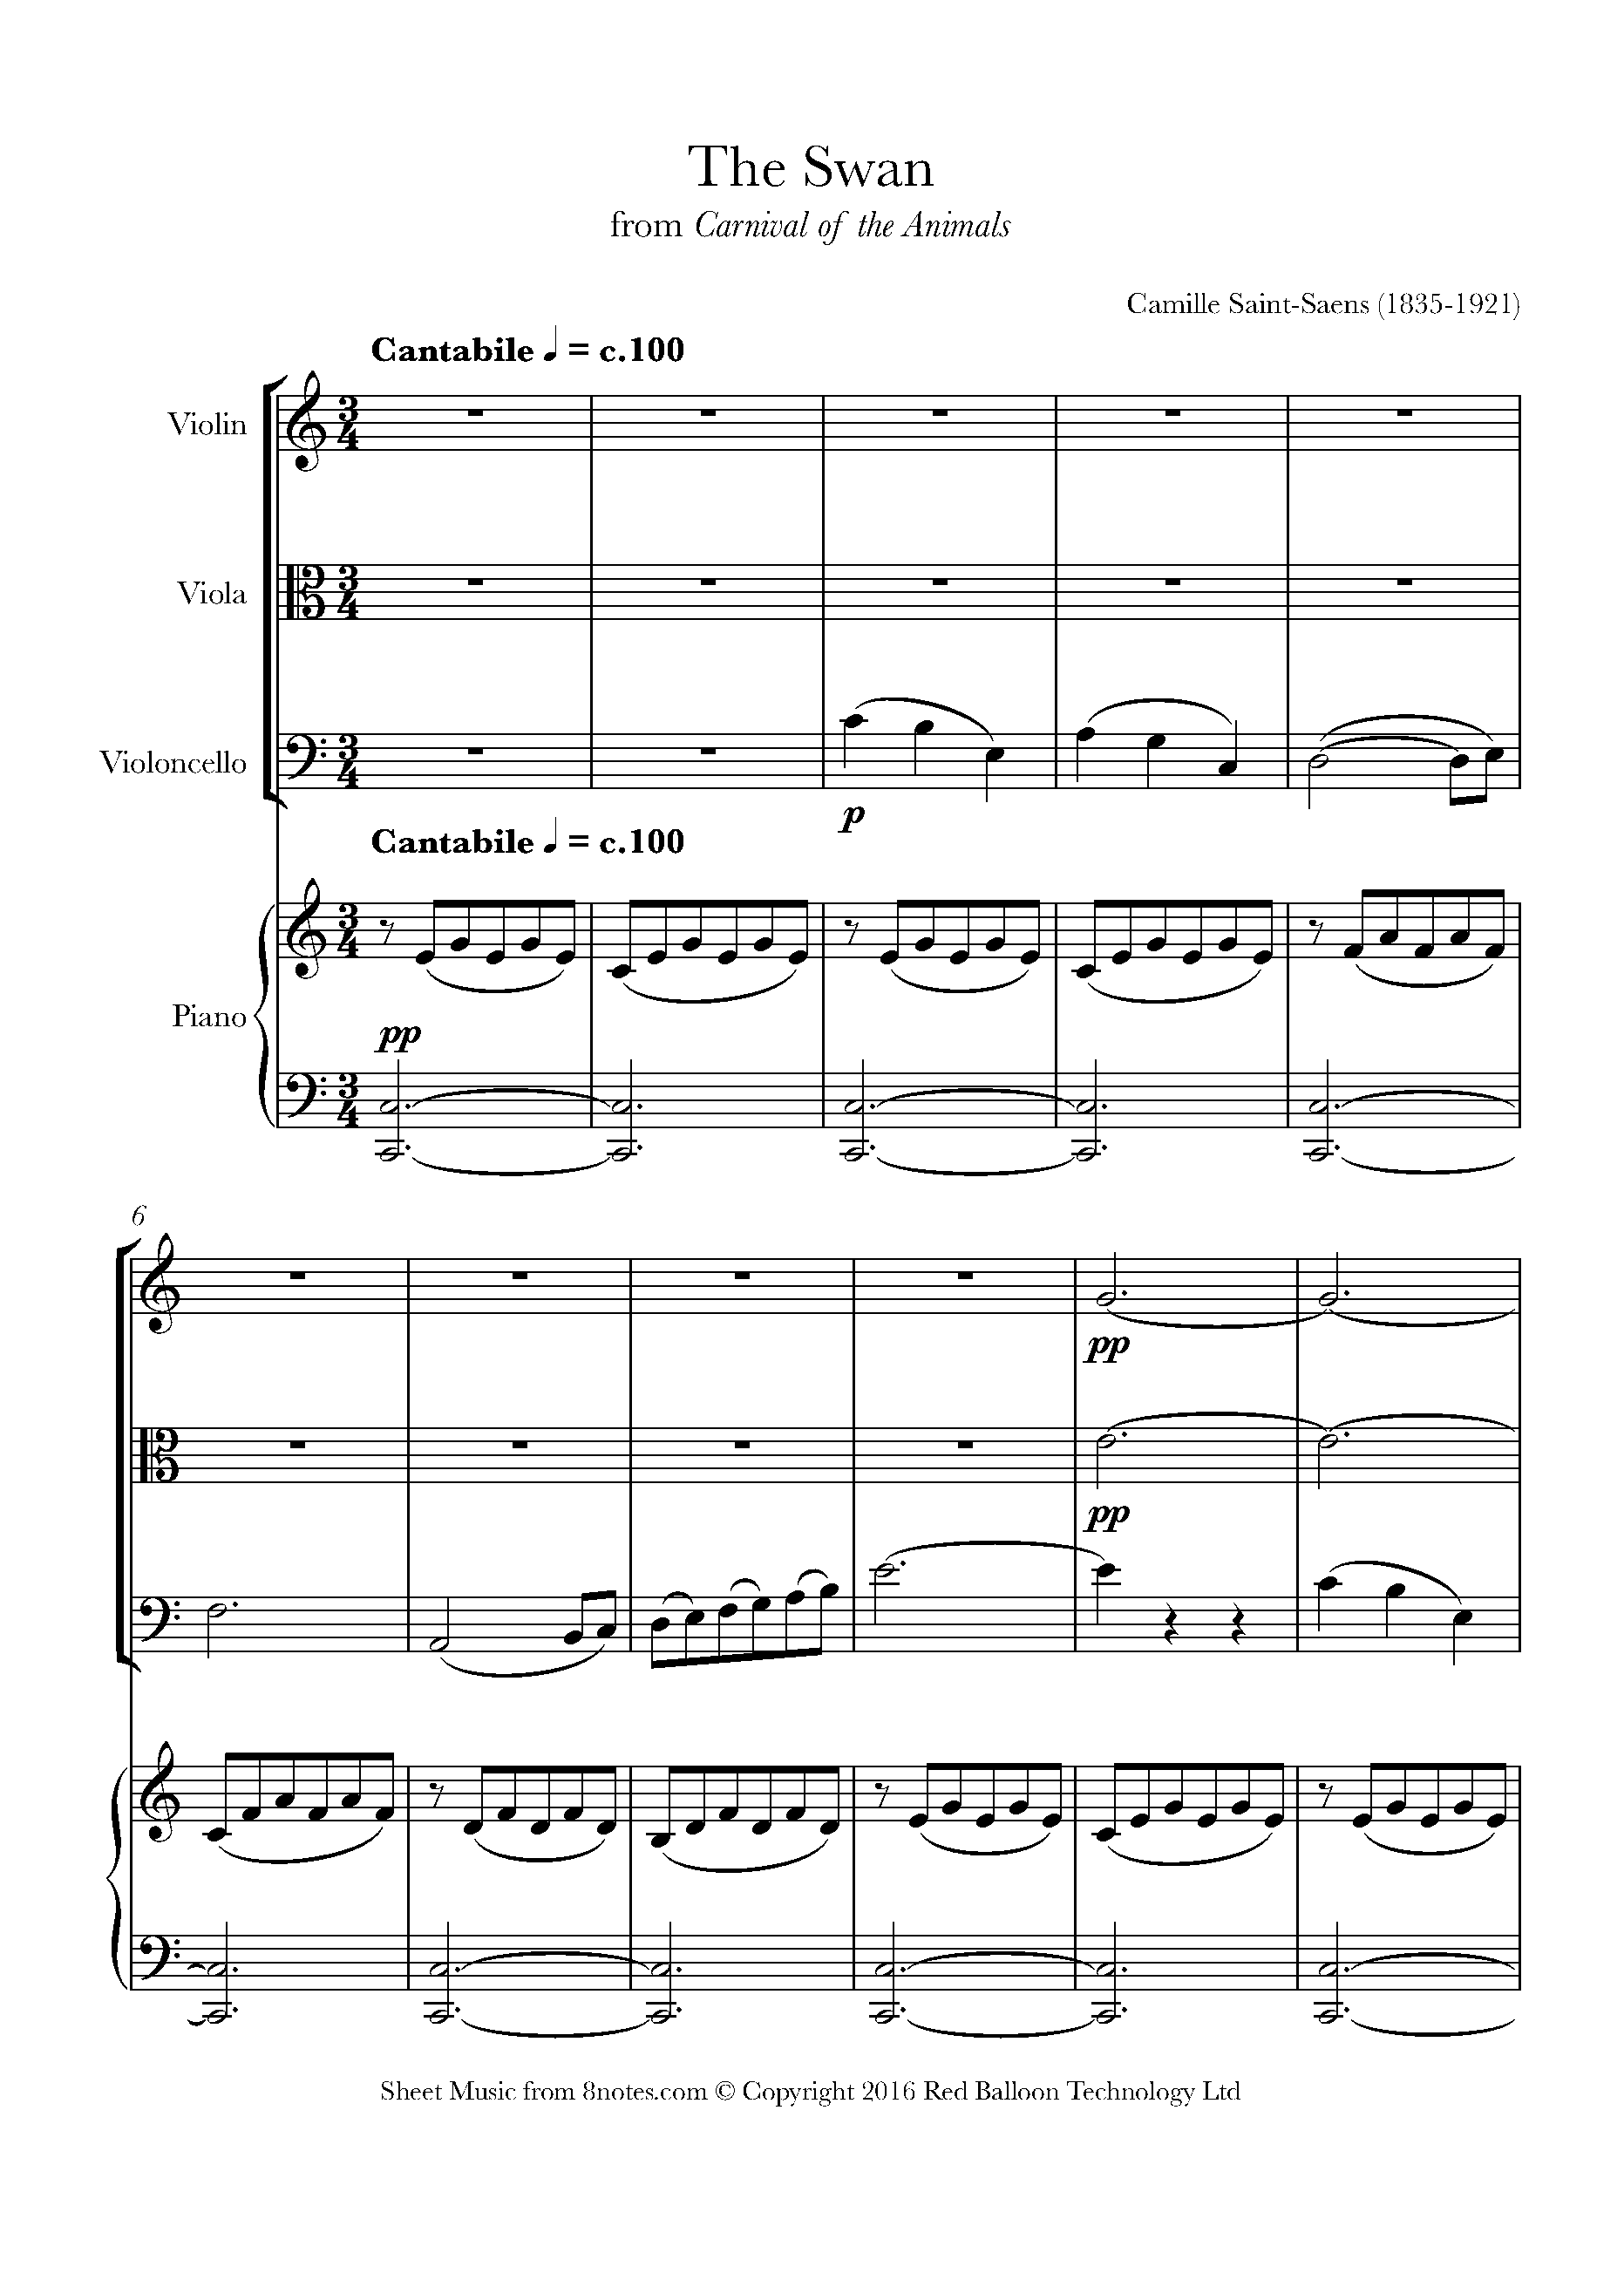 Saint-Saëns - The Swan from Carnival of the Animals Sheet music for Piano  Quartet 